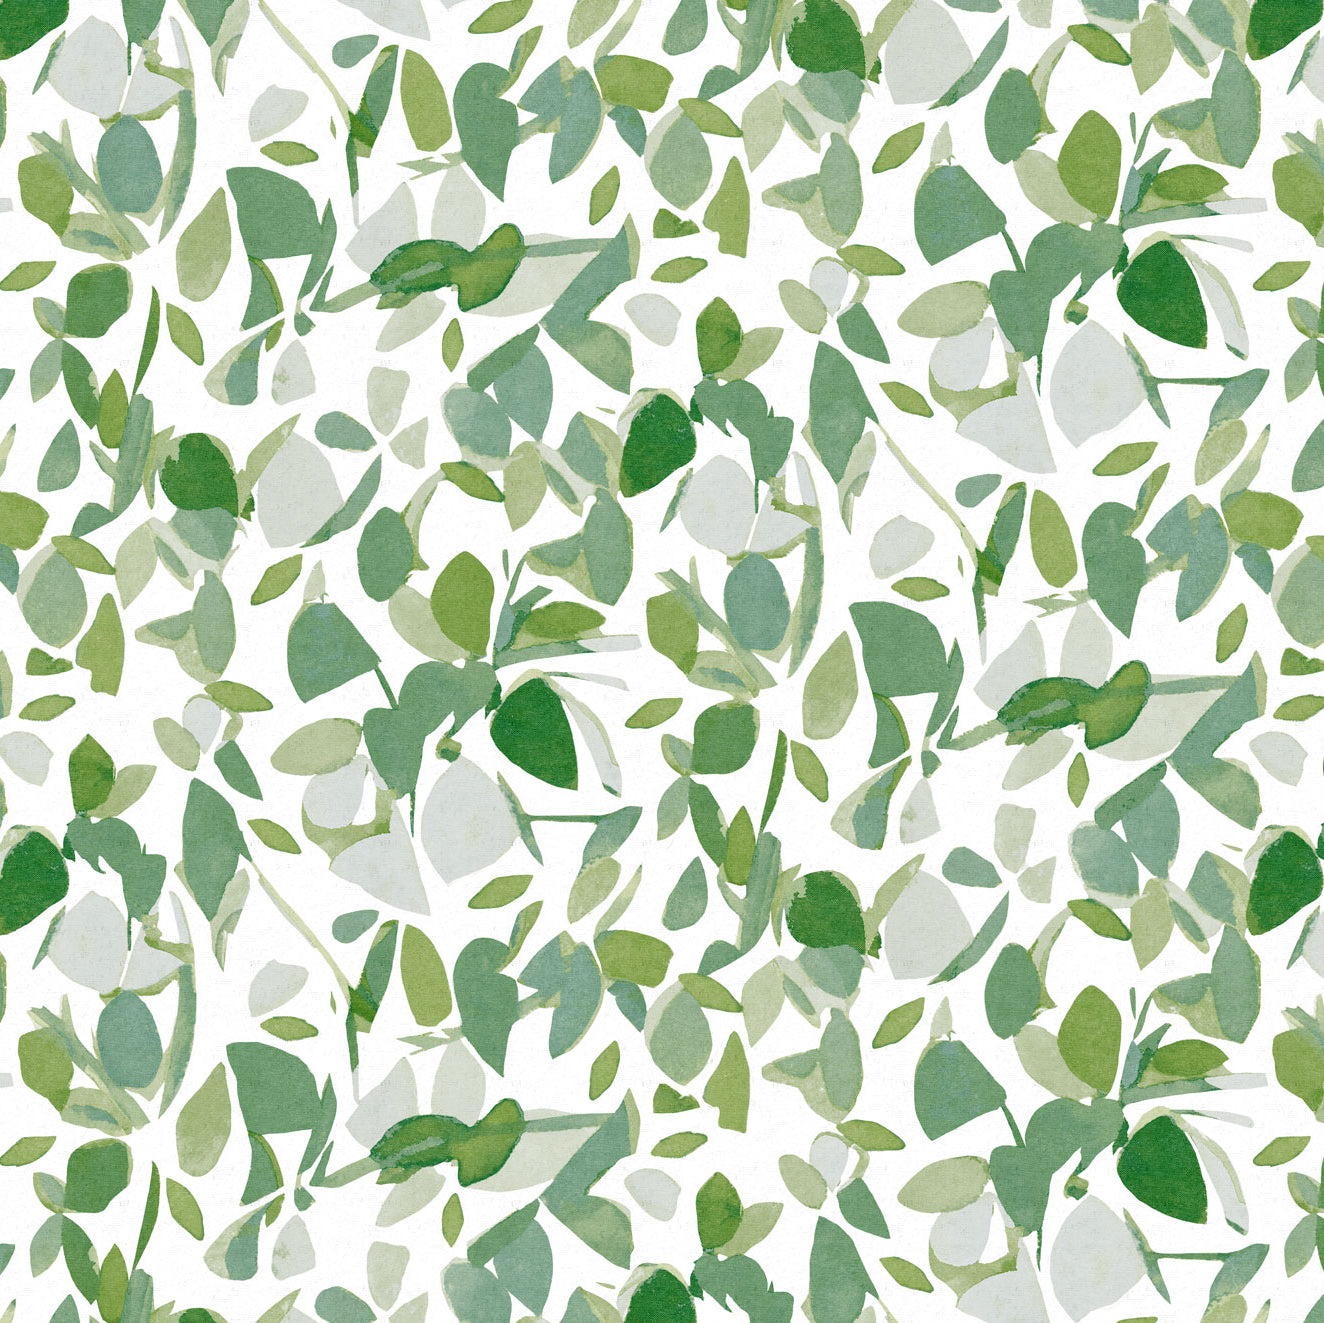 Detail of fabric in a minimal leaf print in shades of green and gray on a white field.